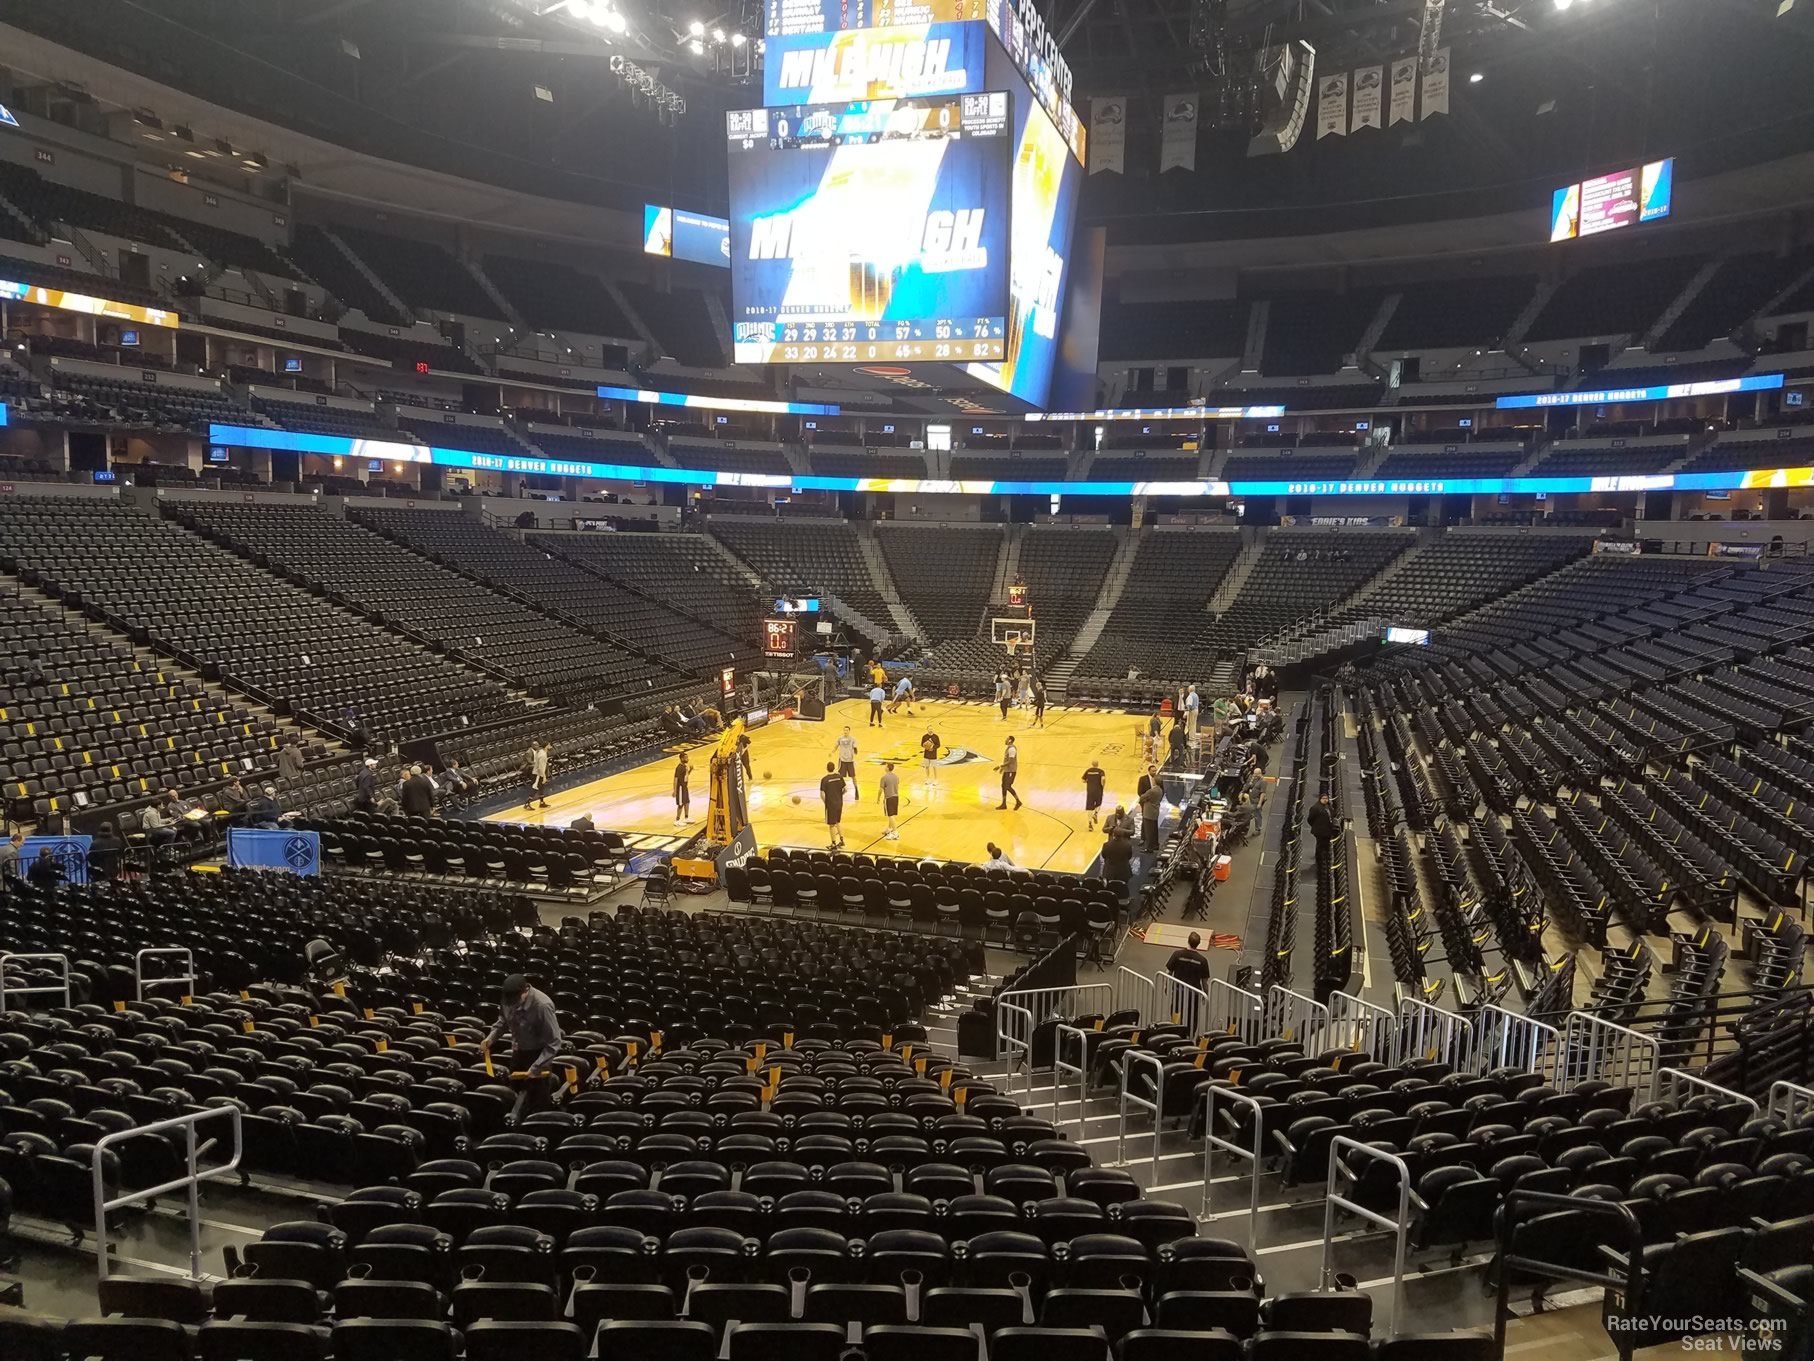 section 110, row 19 seat view  for basketball - ball arena